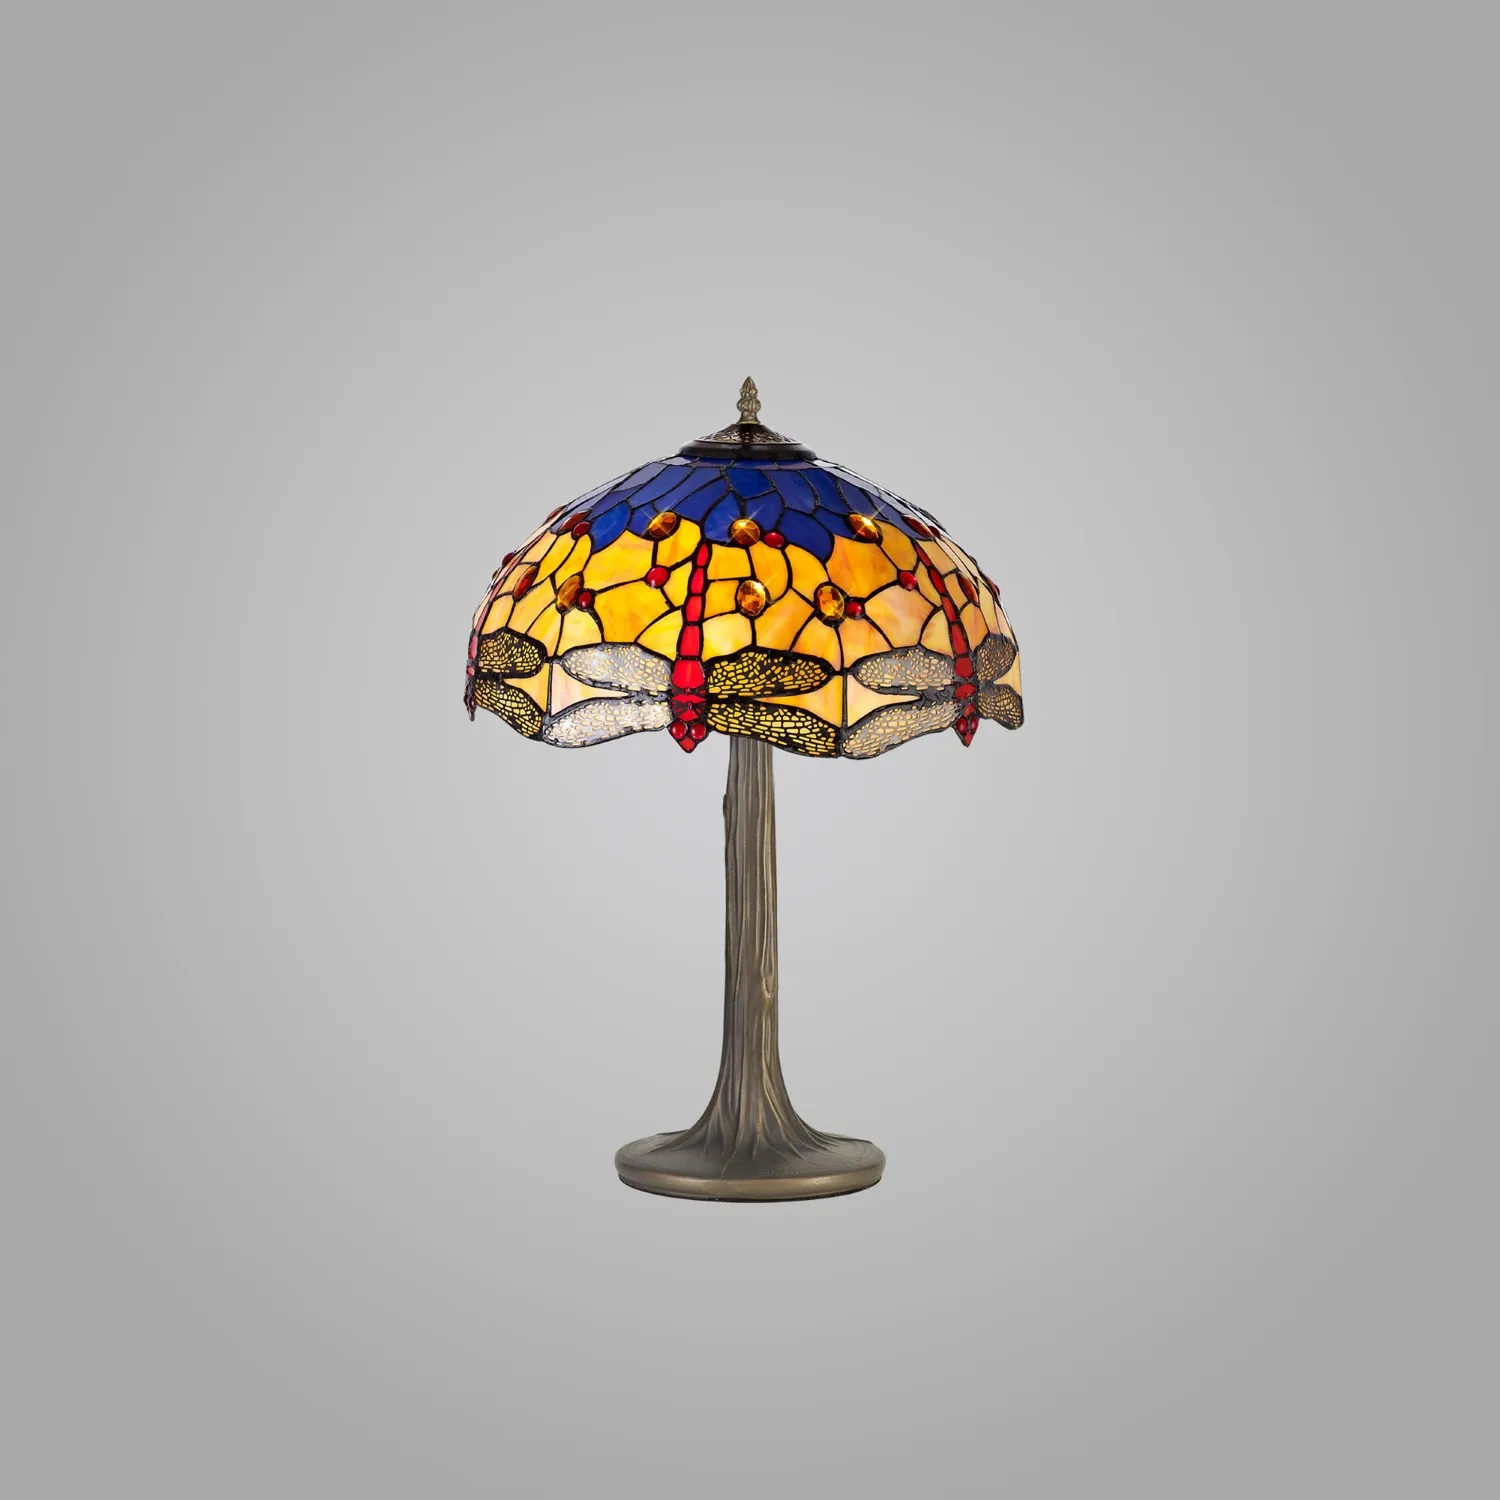 Hitchin 2 Light Tree Like Table Lamp E27 With 40cm Tiffany Shade, Blue Orange Crystal Aged Antique Brass